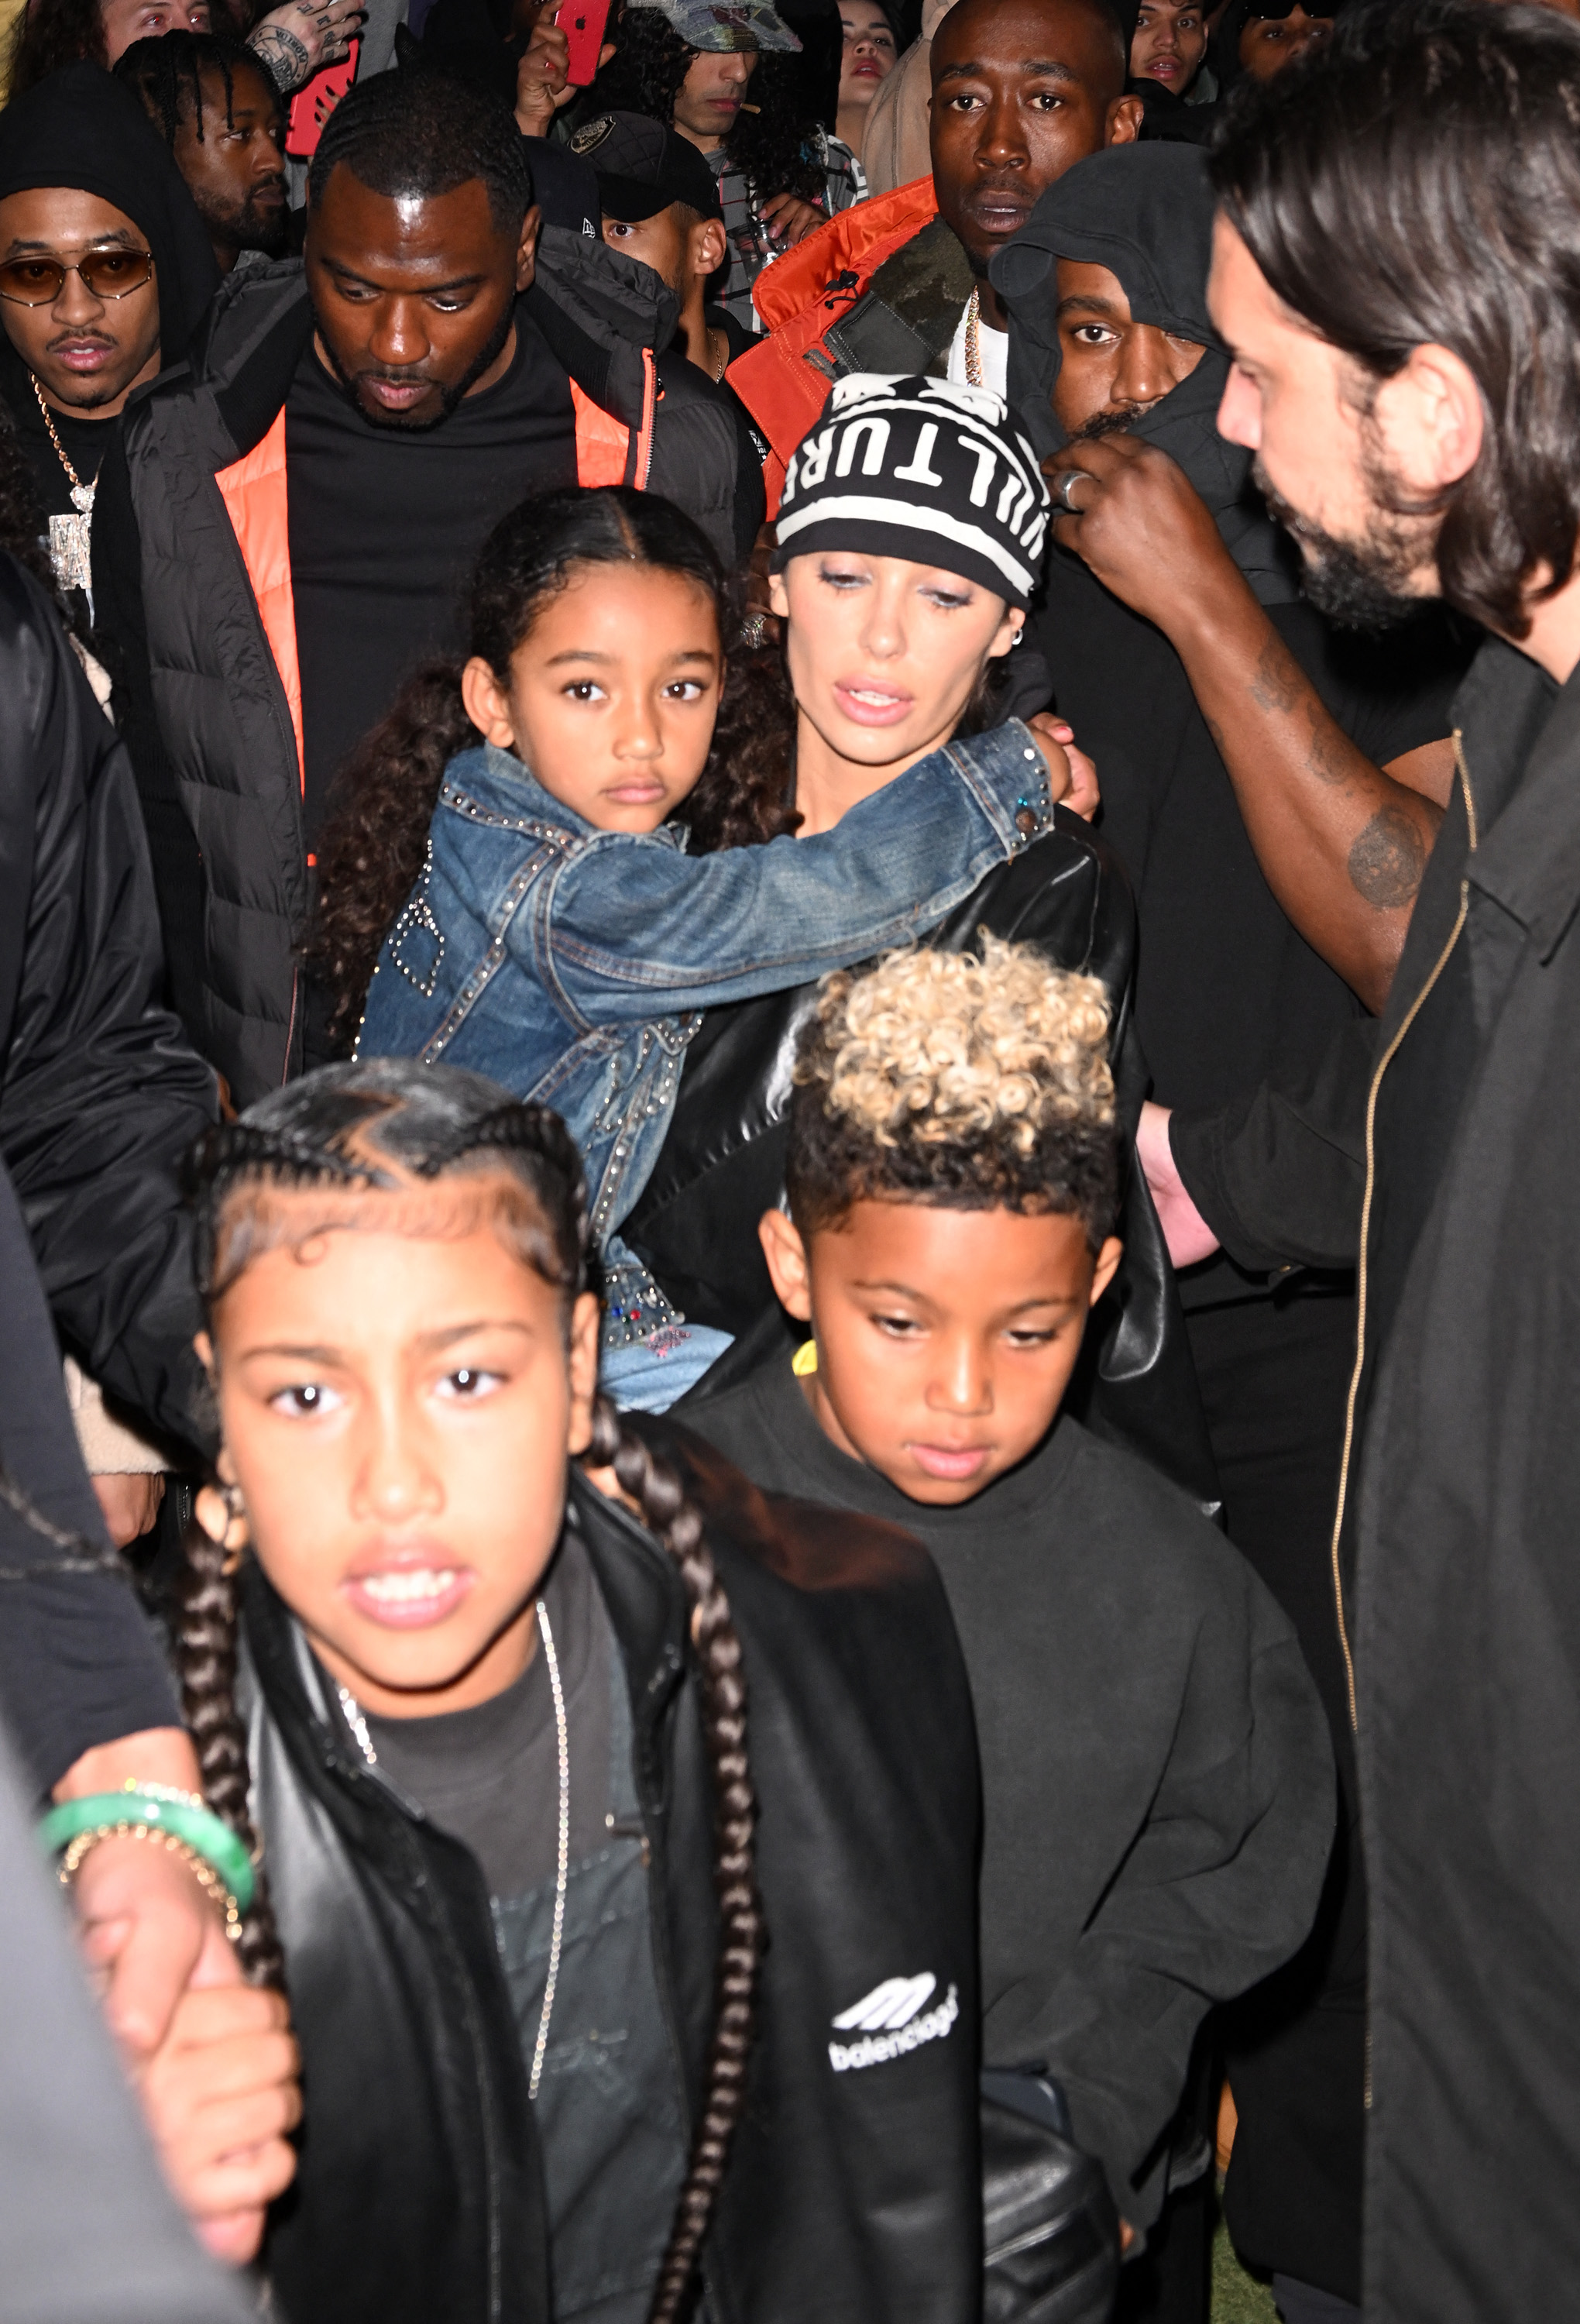 Fans have raised concern both for Bianca and for Kanye's children in light of her NSFW fashion